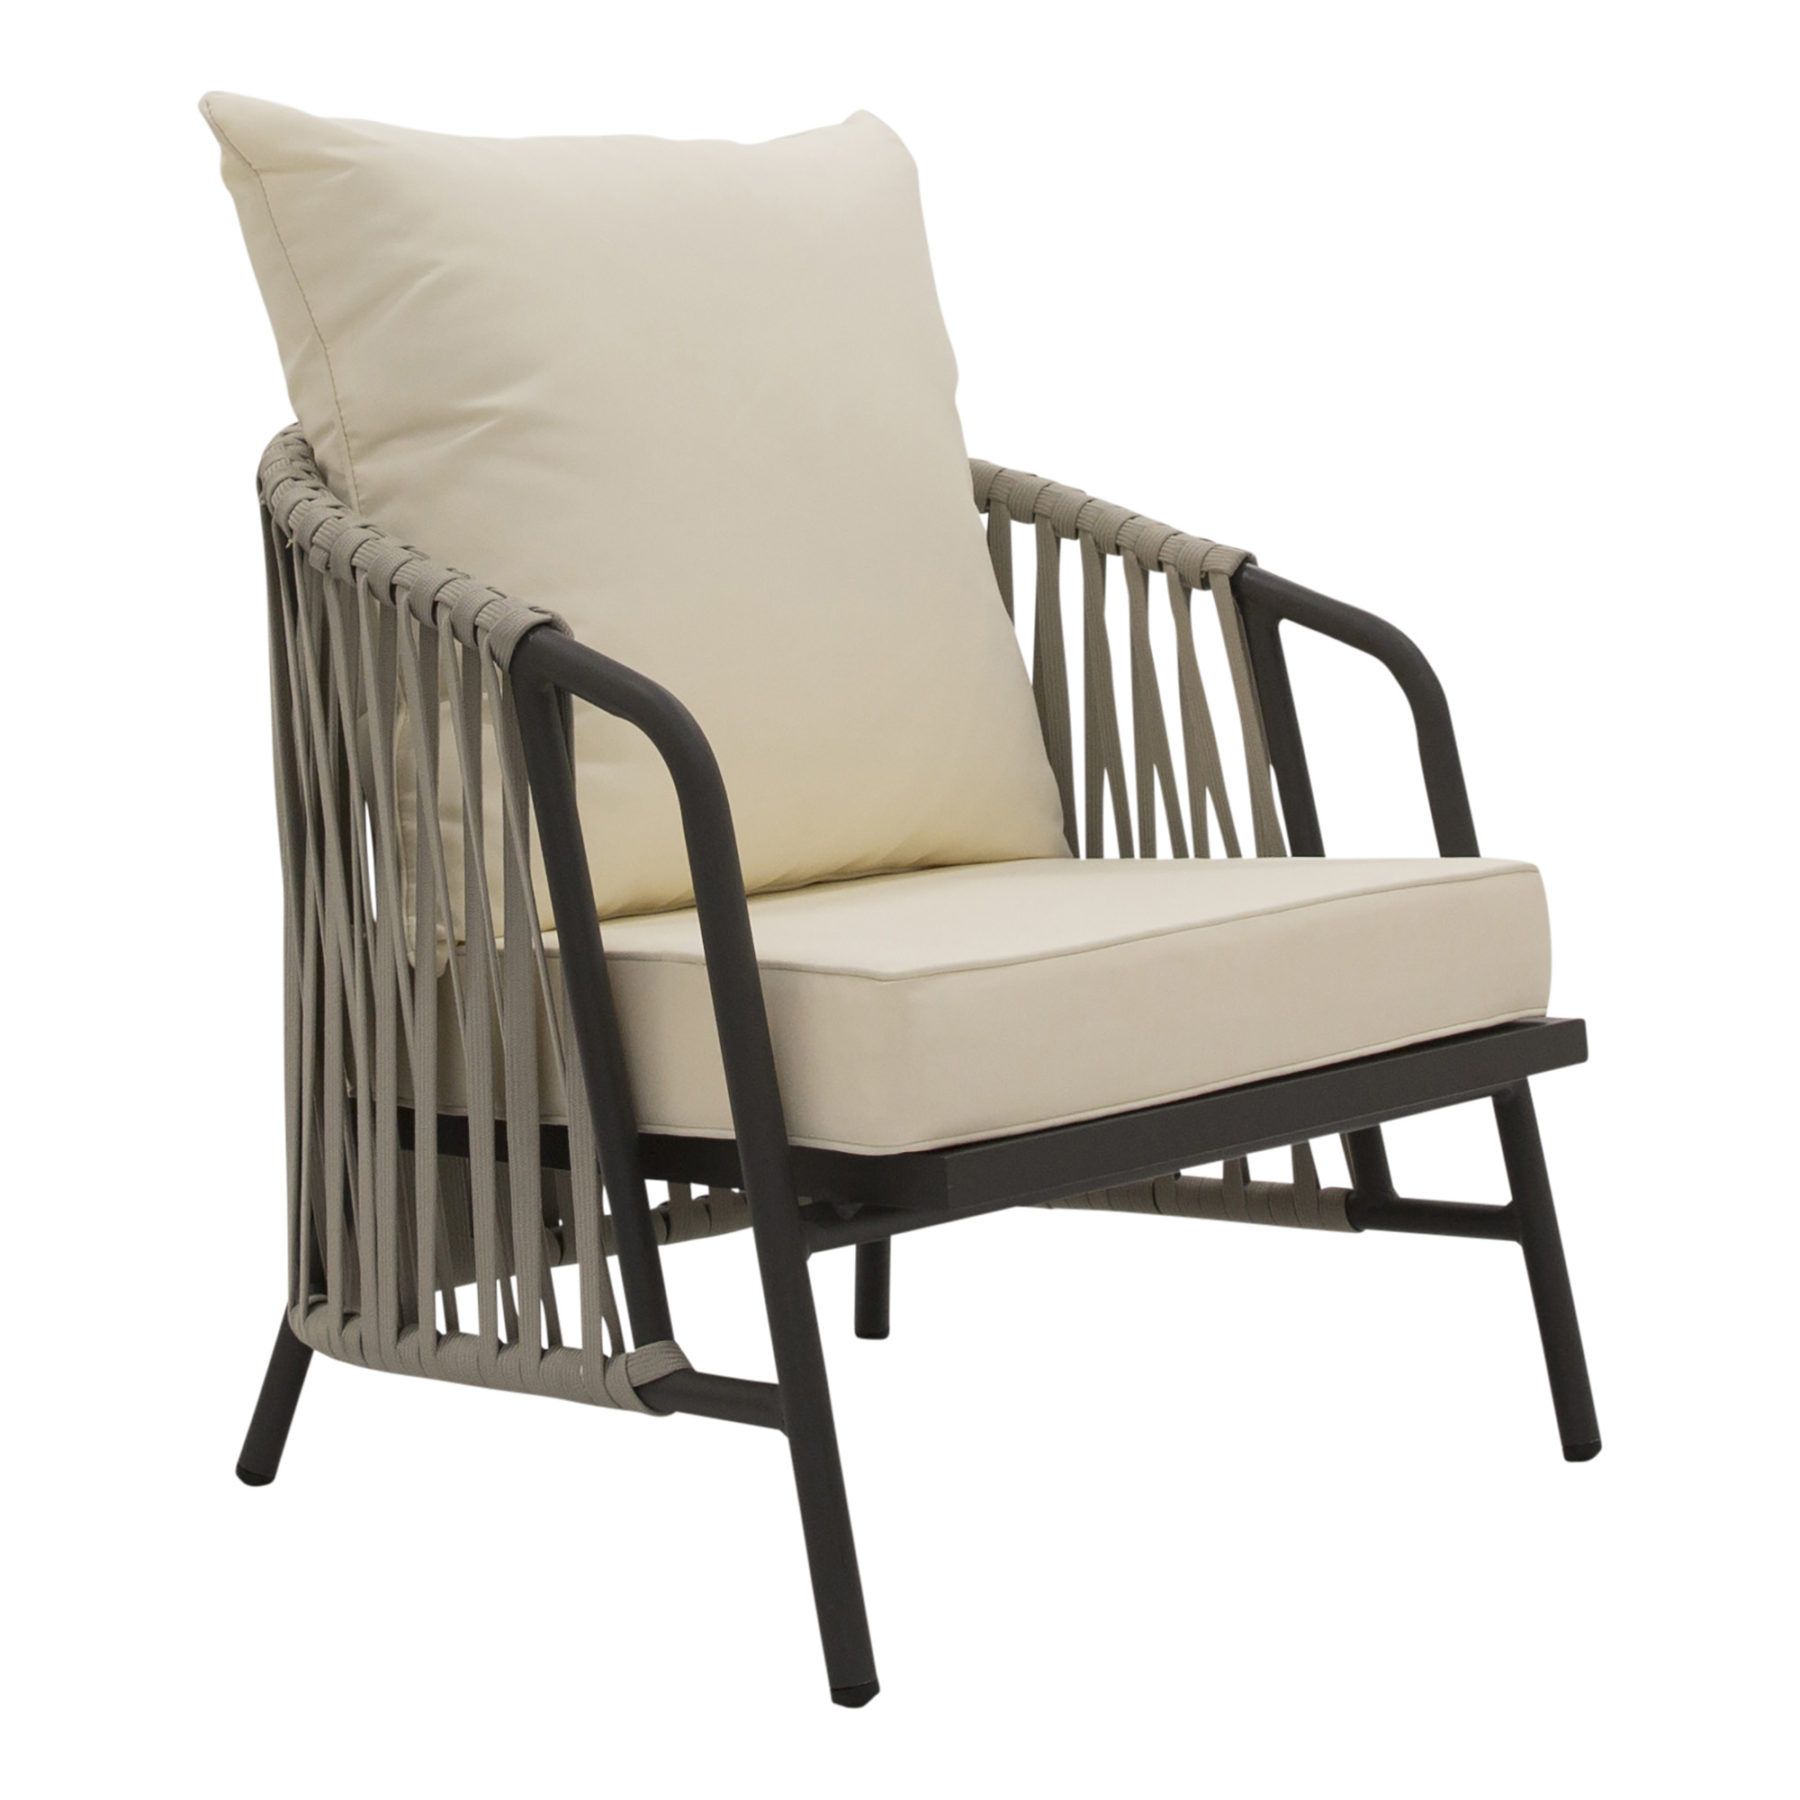 Anchor Outdoor Armchair / Occasional Chair White + Gunmetal – Huntley For Outdoor Armchairs (View 10 of 15)